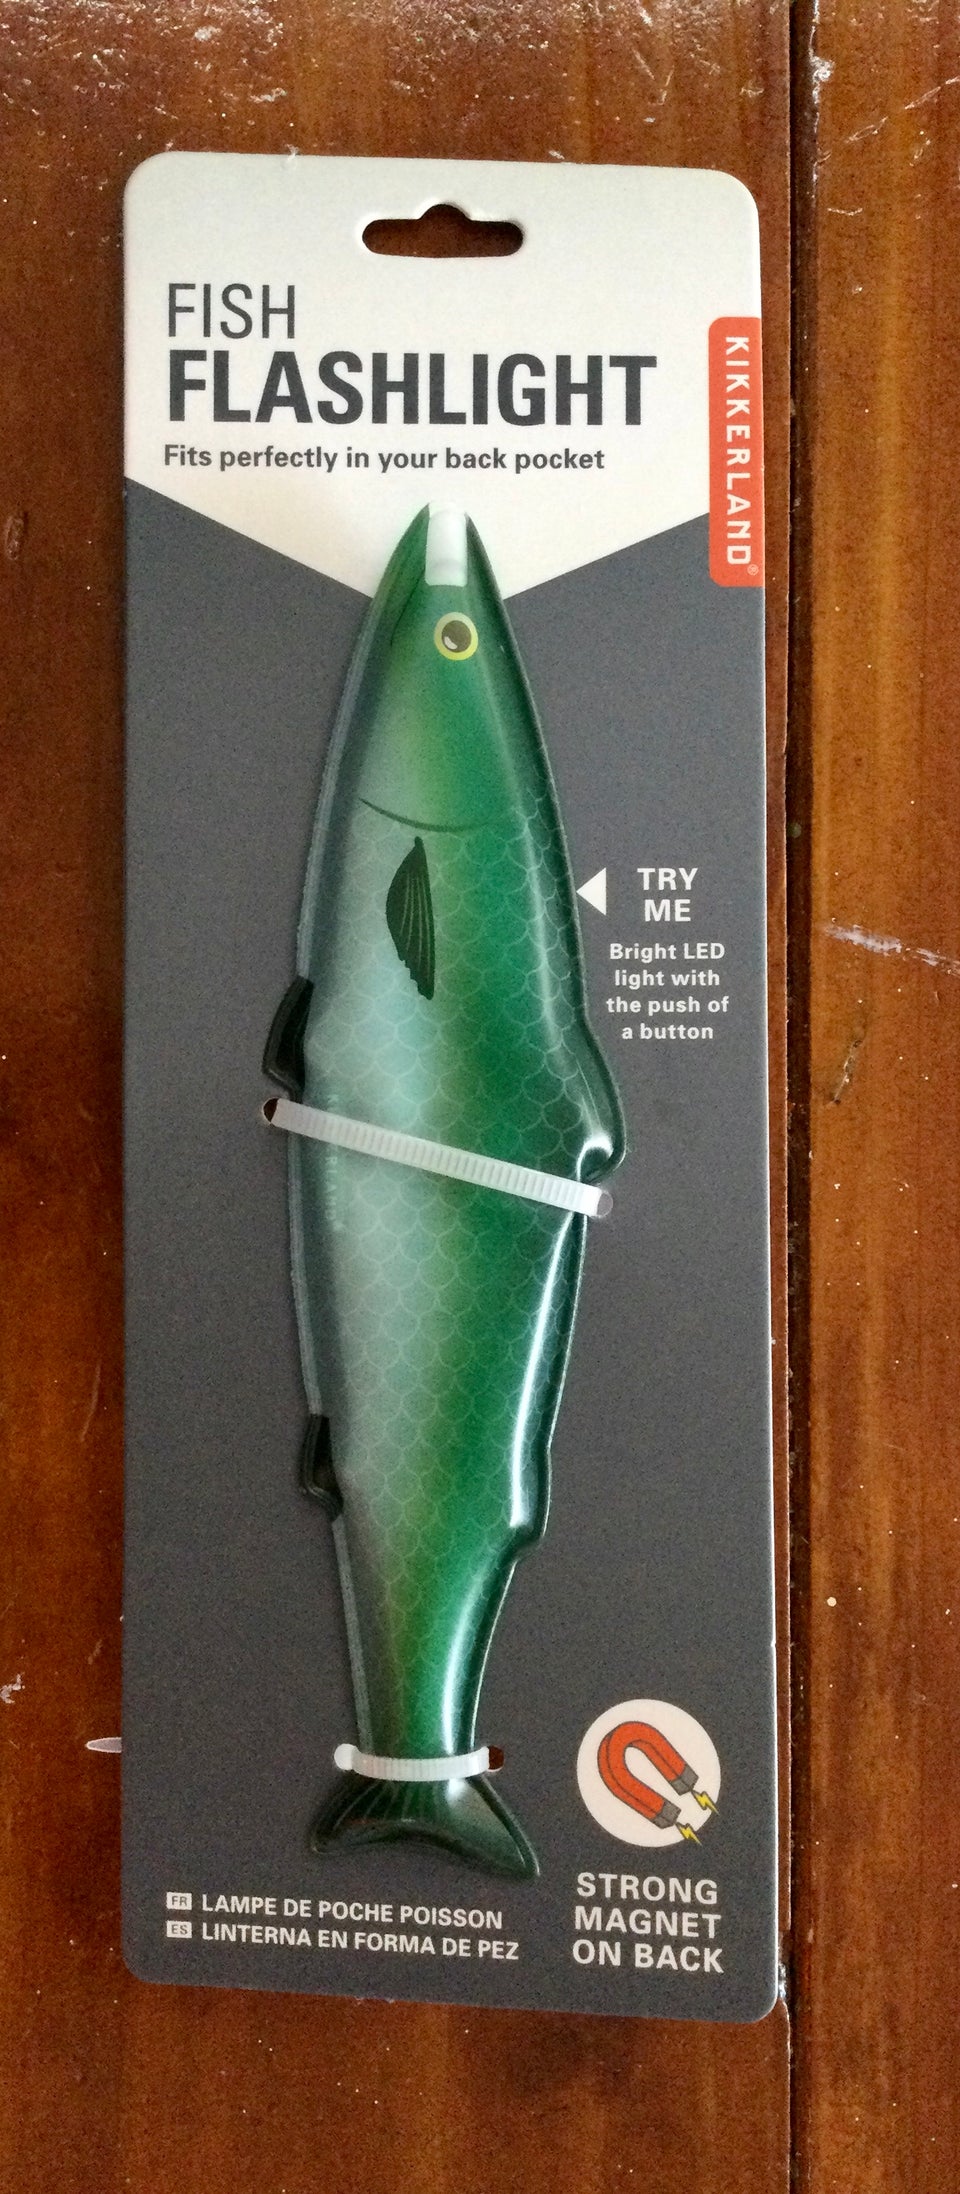 Shows fish flashlight in package